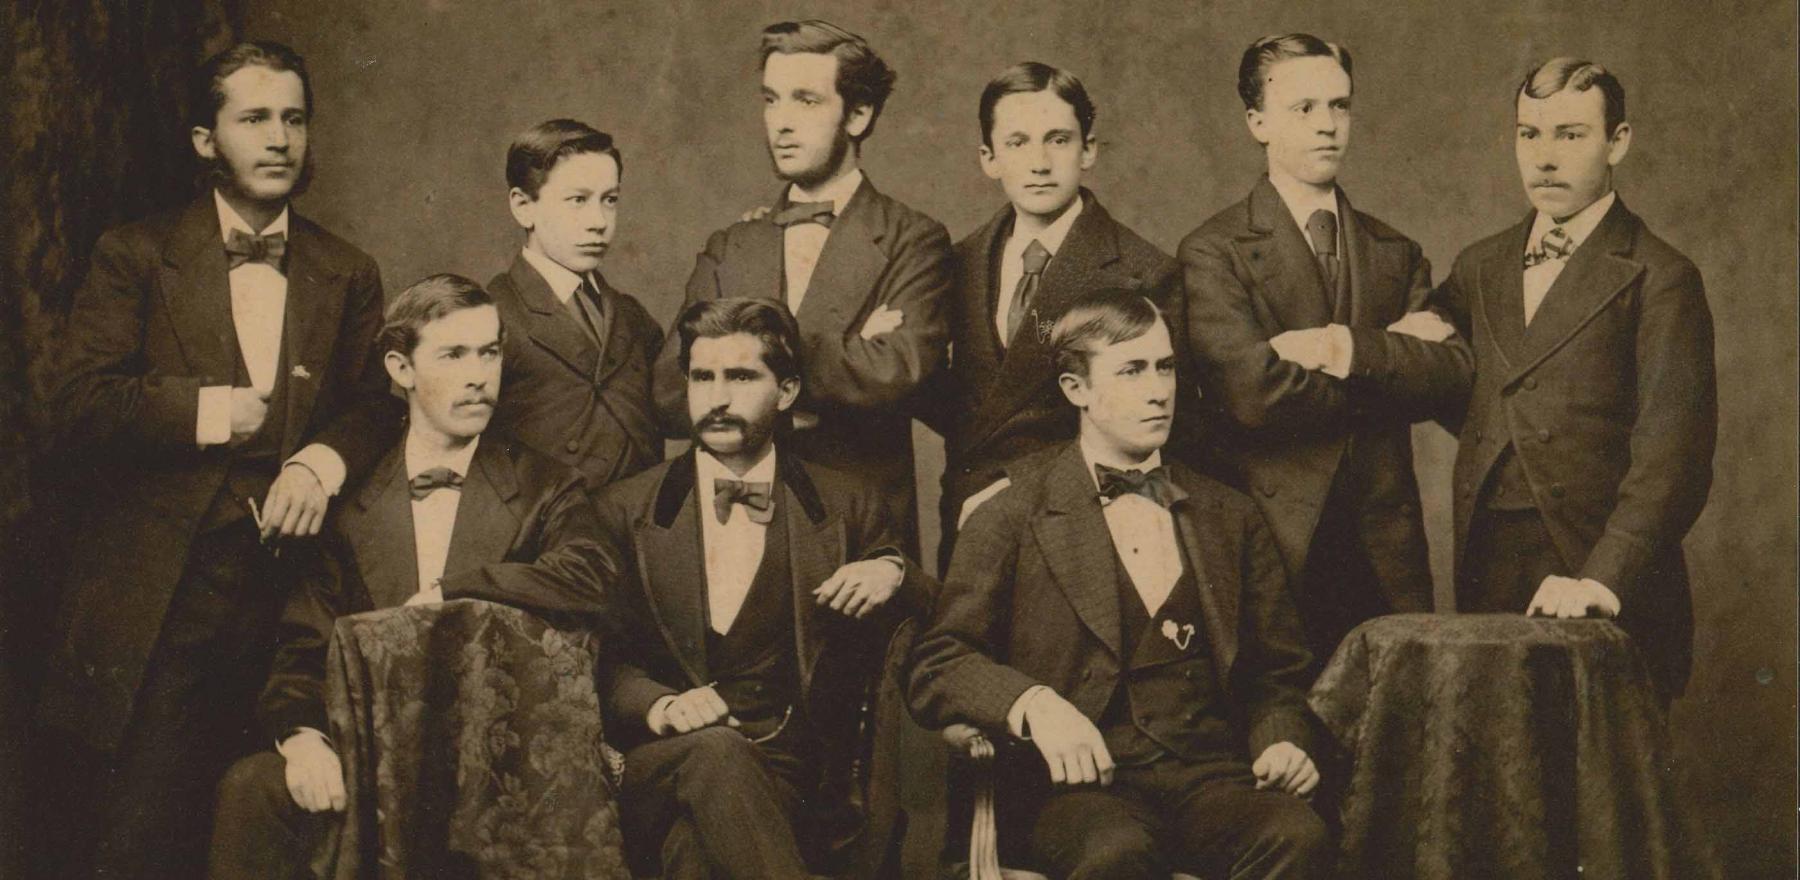 A sepia-tinted photo of nine men posing for a photo in suits